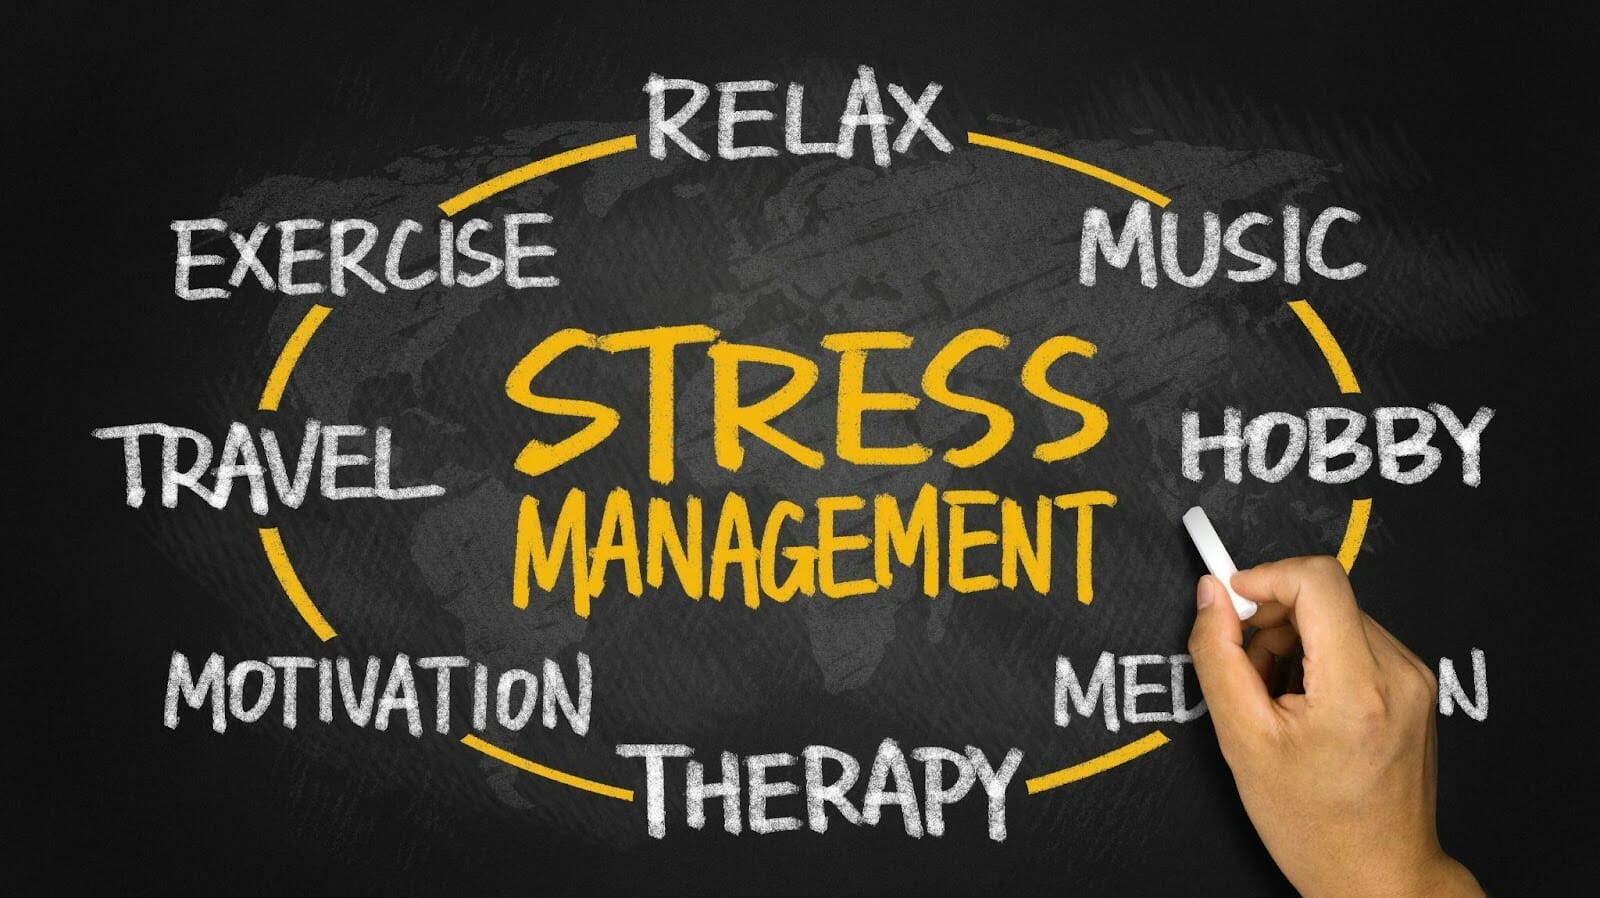 A checklist of tools for managing stress